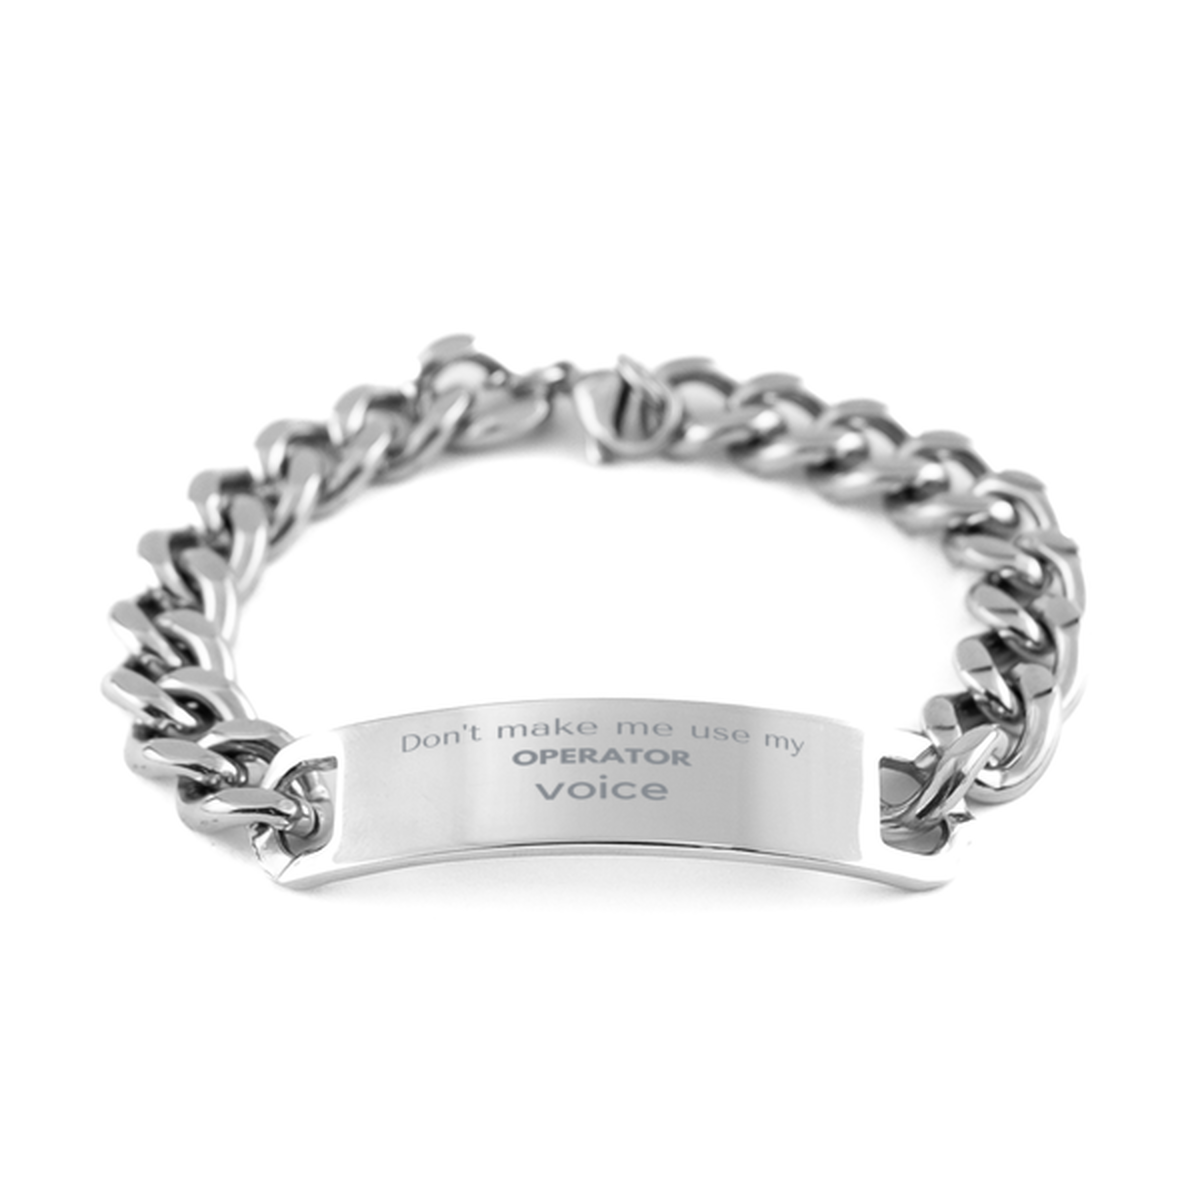 Don't make me use my Operator voice, Sarcasm Operator Gifts, Christmas Operator Cuban Chain Stainless Steel Bracelet Birthday Unique Gifts For Operator Coworkers, Men, Women, Colleague, Friends